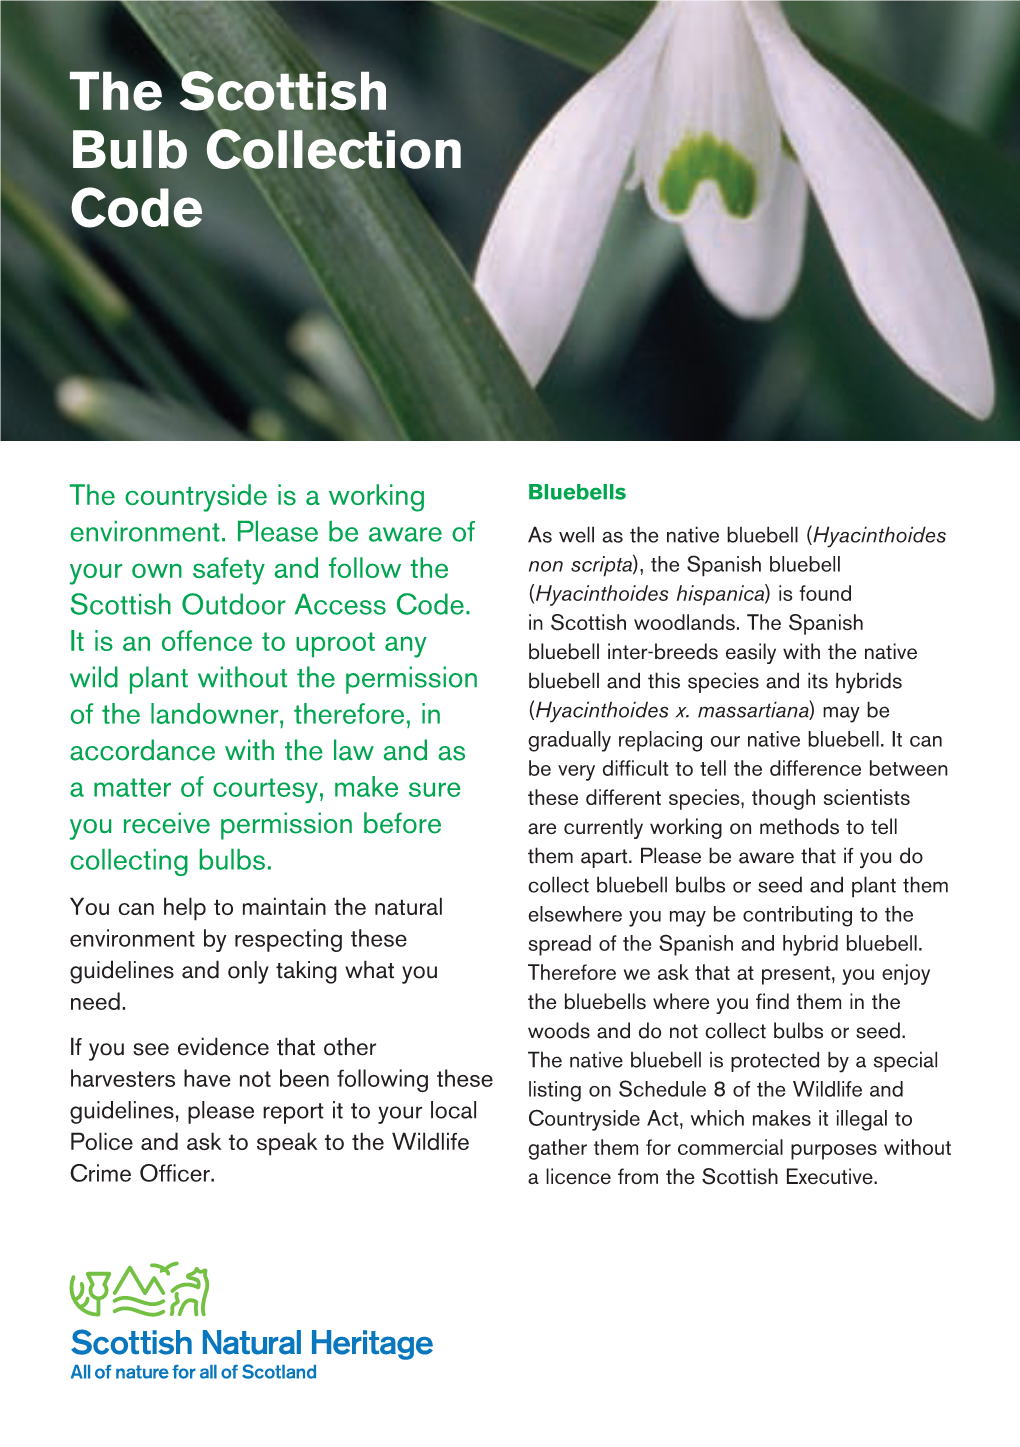 The Scottish Bulb Collection Code